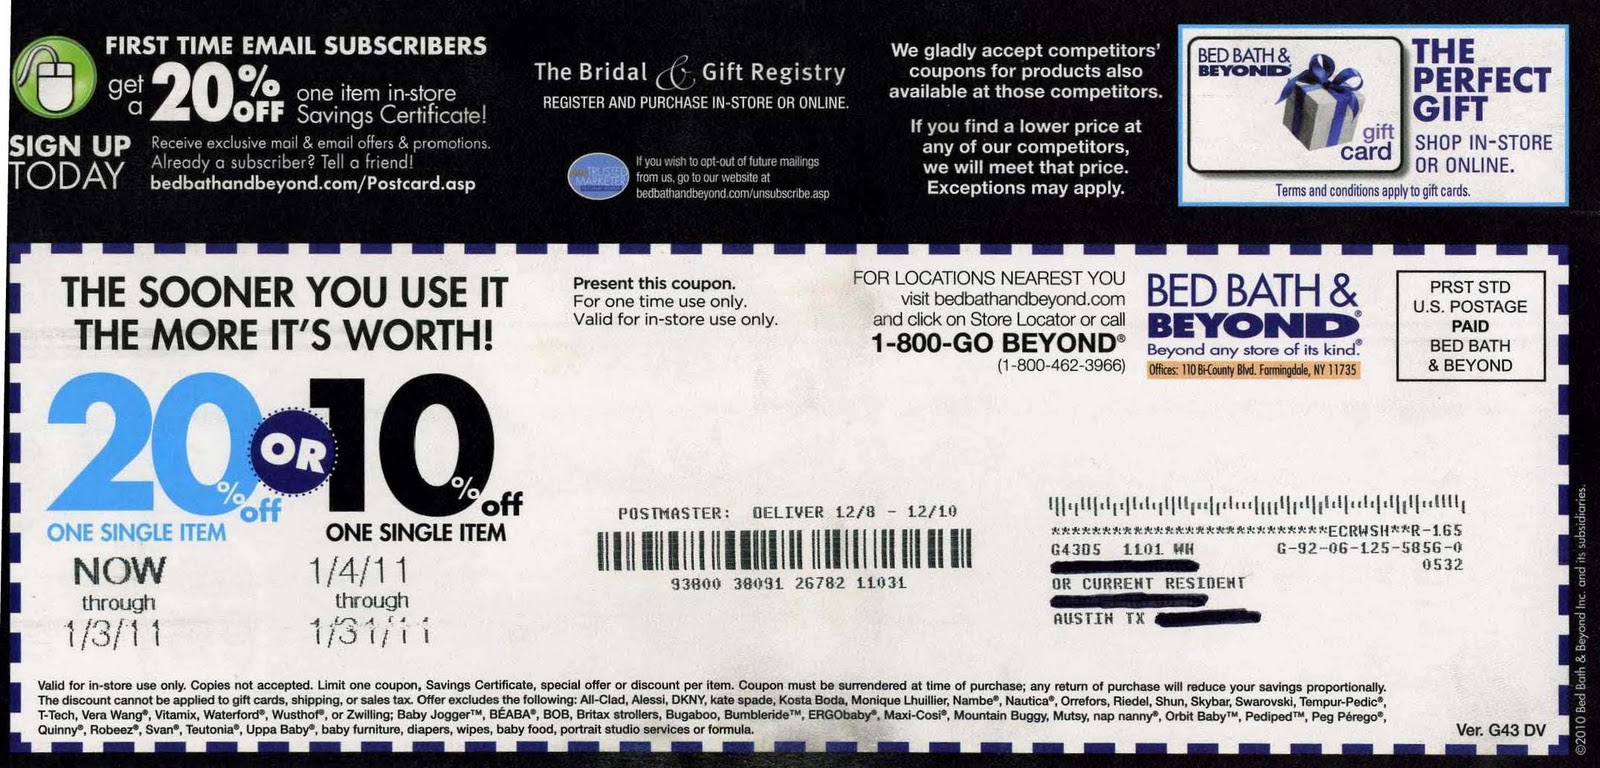 Can you use more than one Bed Bath & Beyond printable coupon for one purchase?